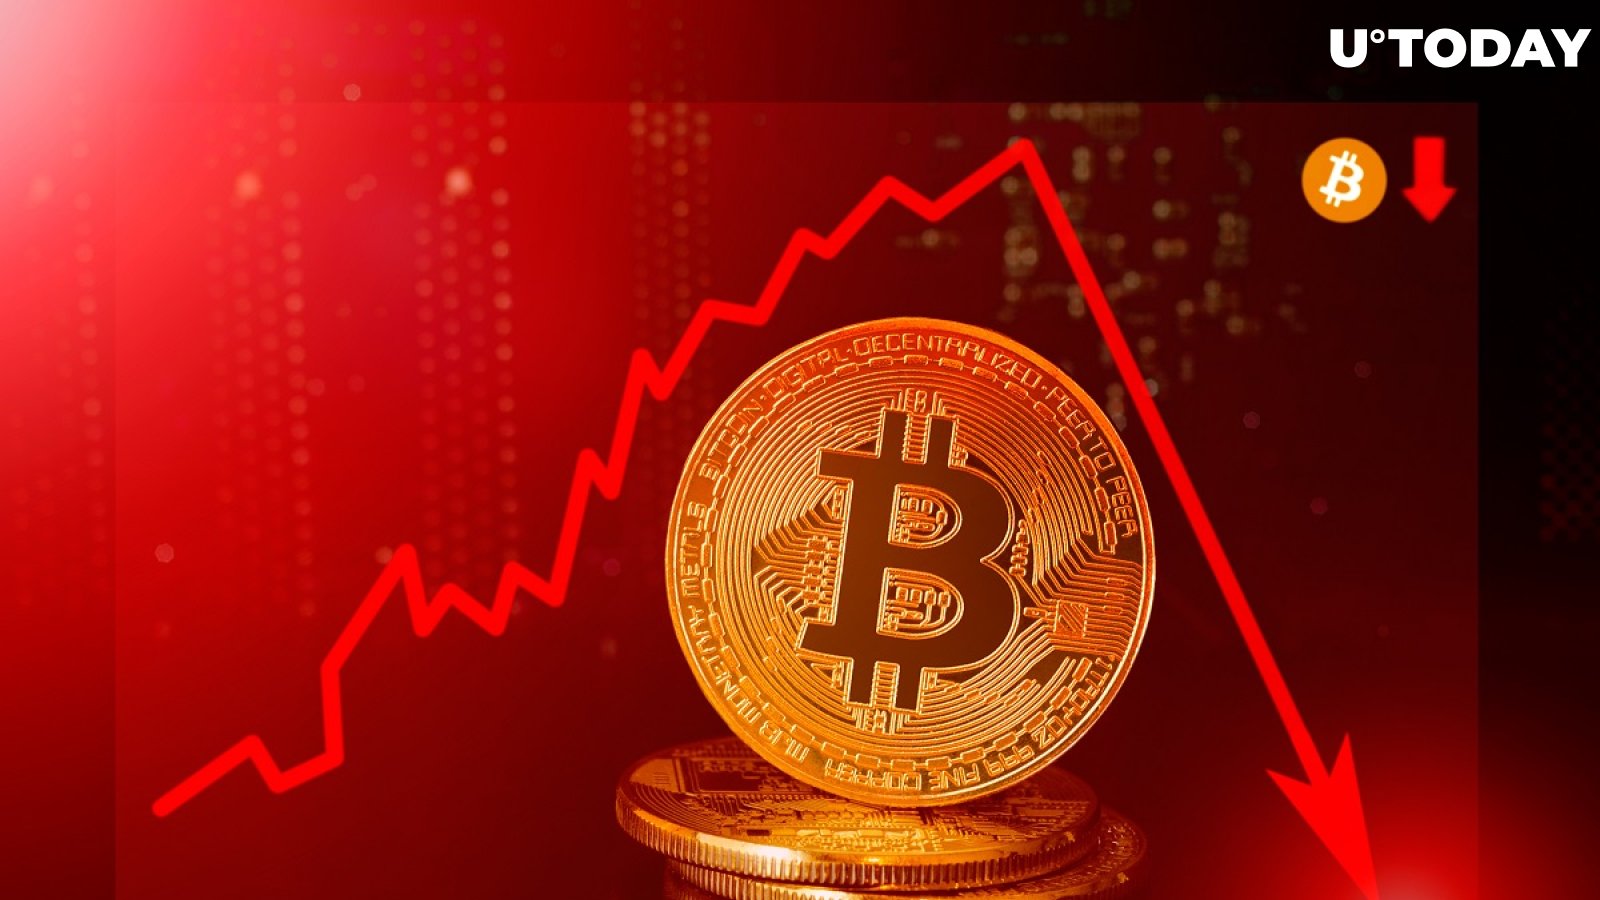 Bitcoin Price Dips to $9,300. Should Bulls Be Worried? 